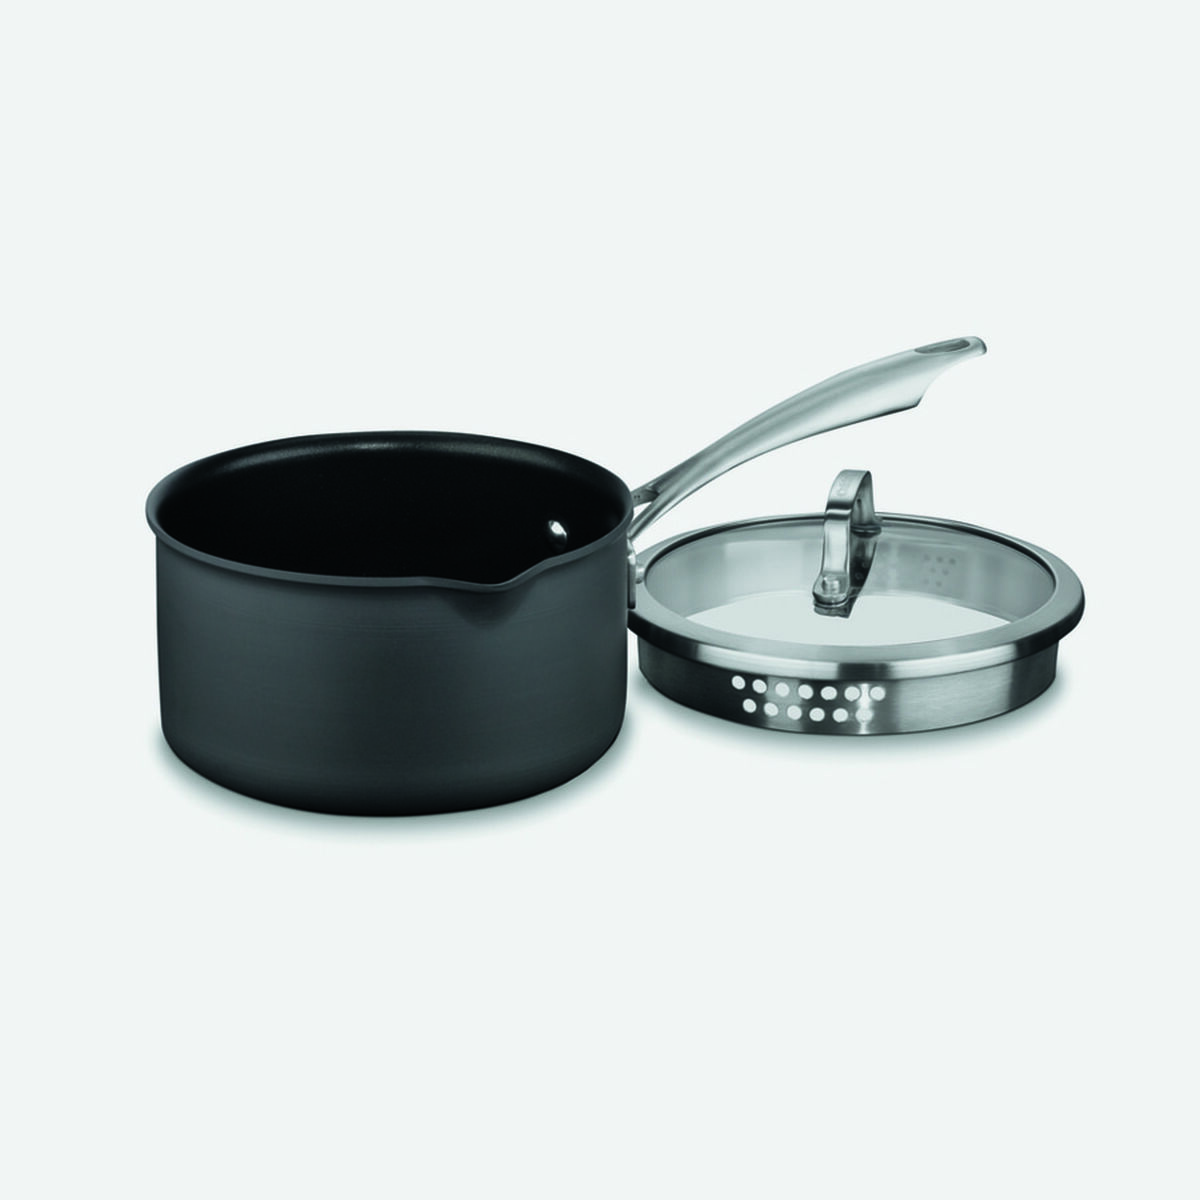 Discontinued 2 Quart Cook and Pour Saucepan with Cover